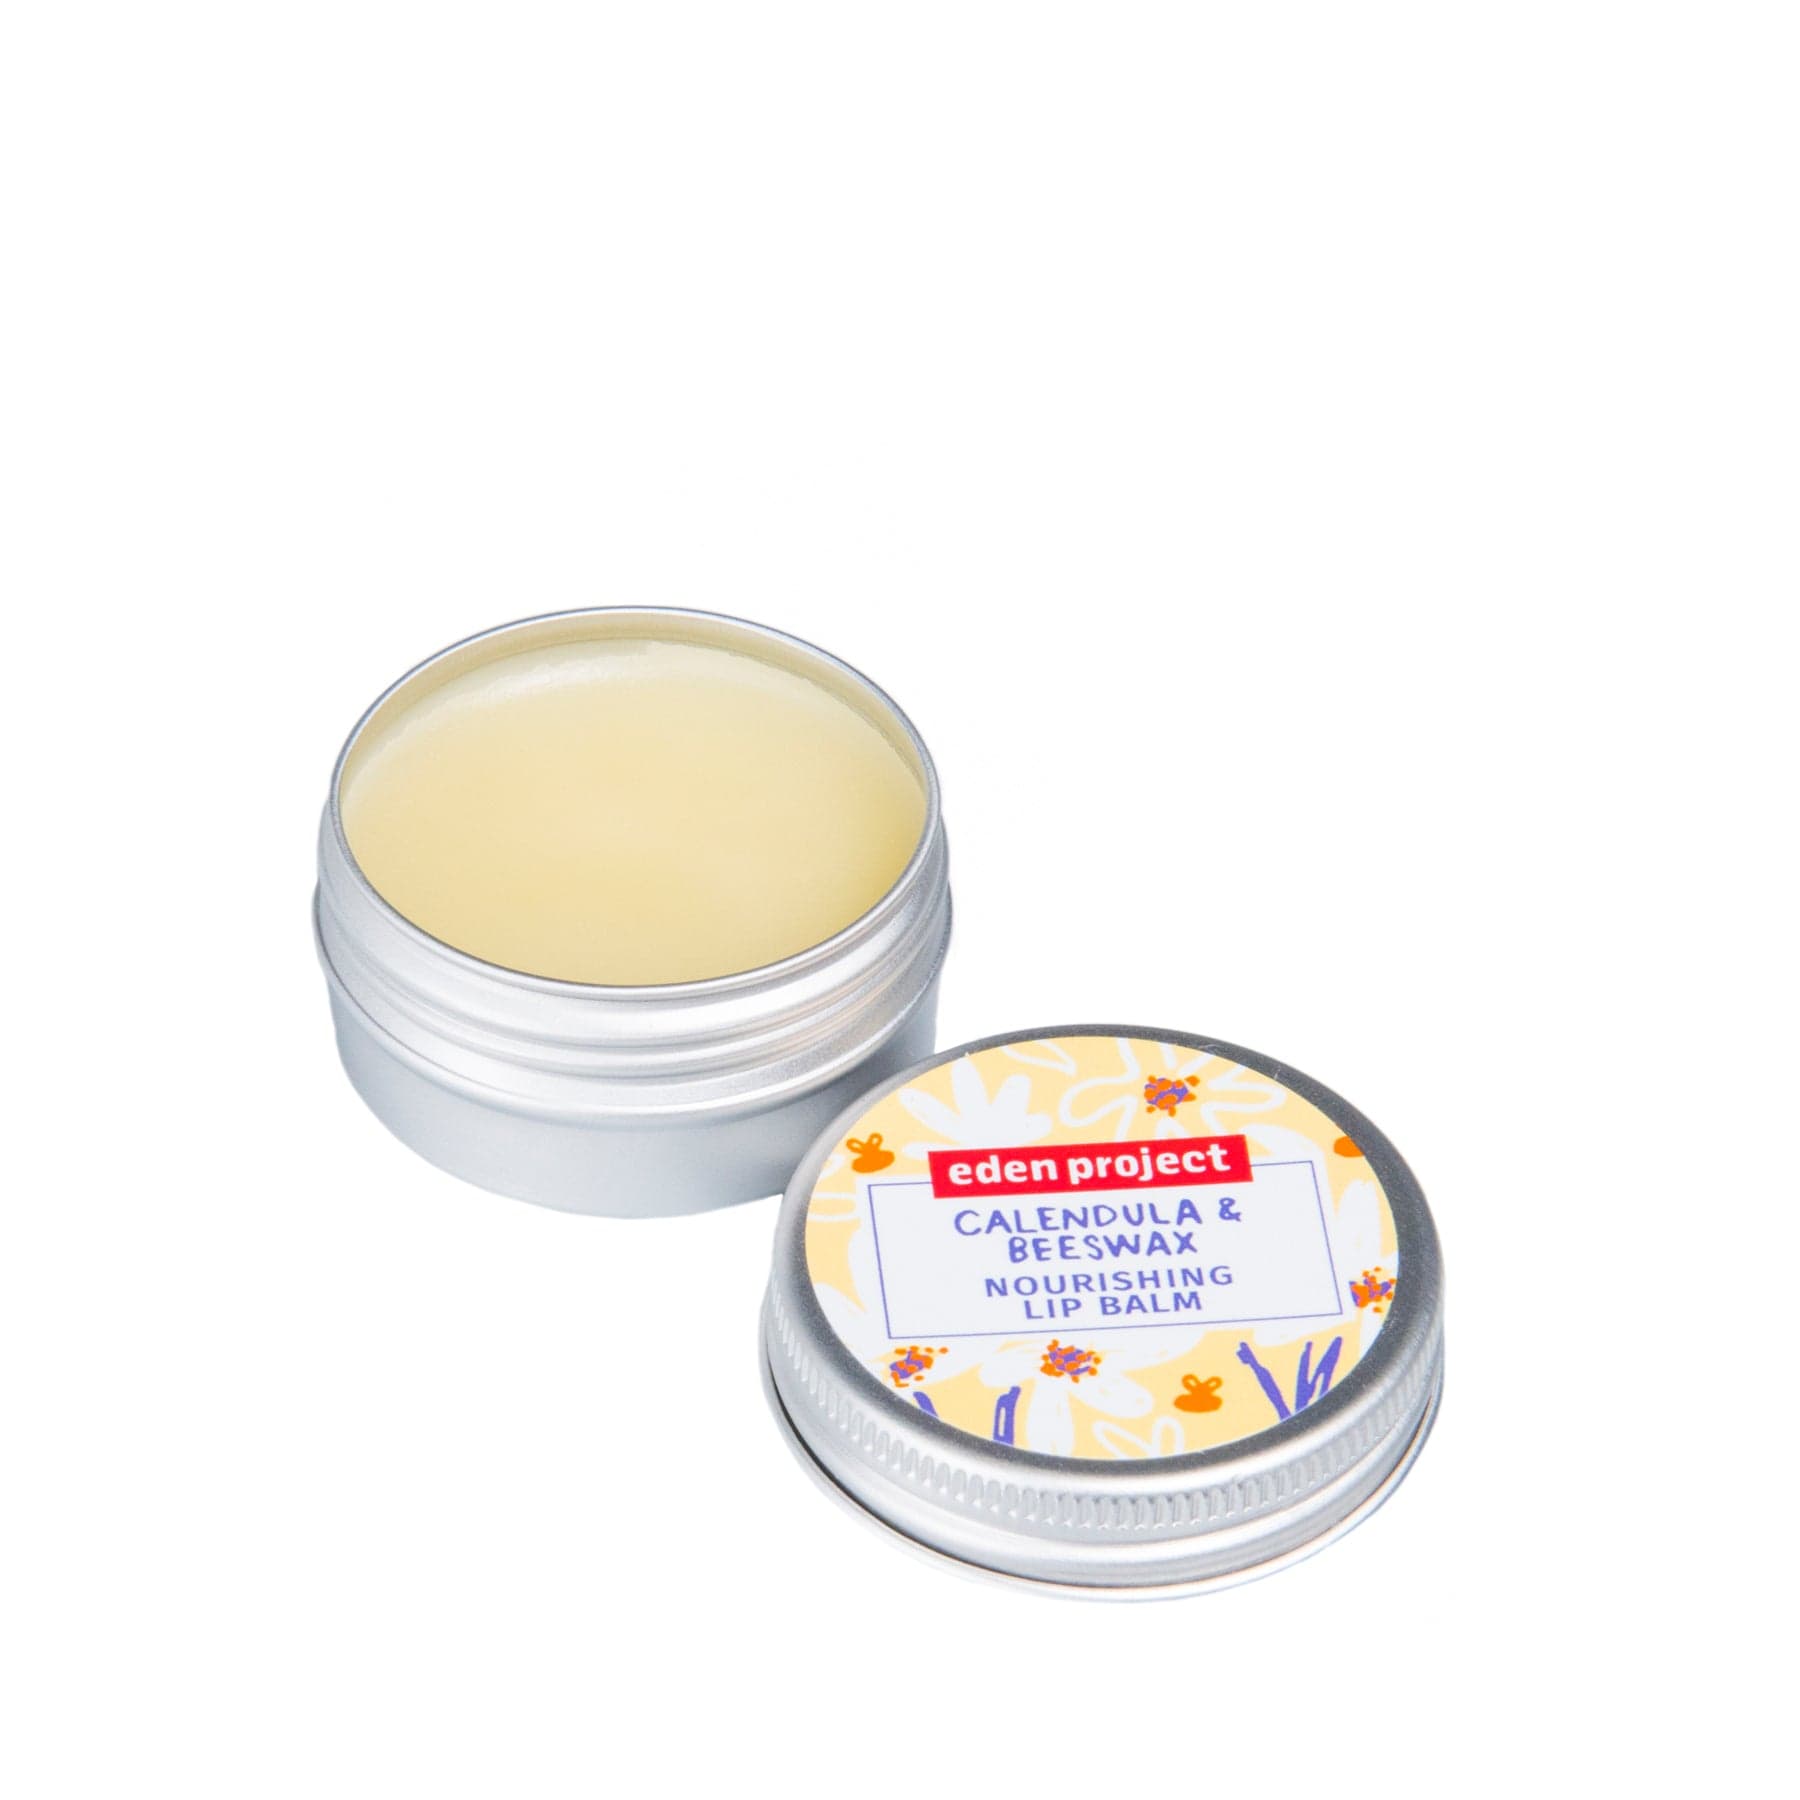 Eden Project calendula and beeswax nourishing lip balm in open tin container, organic skincare product on white background.